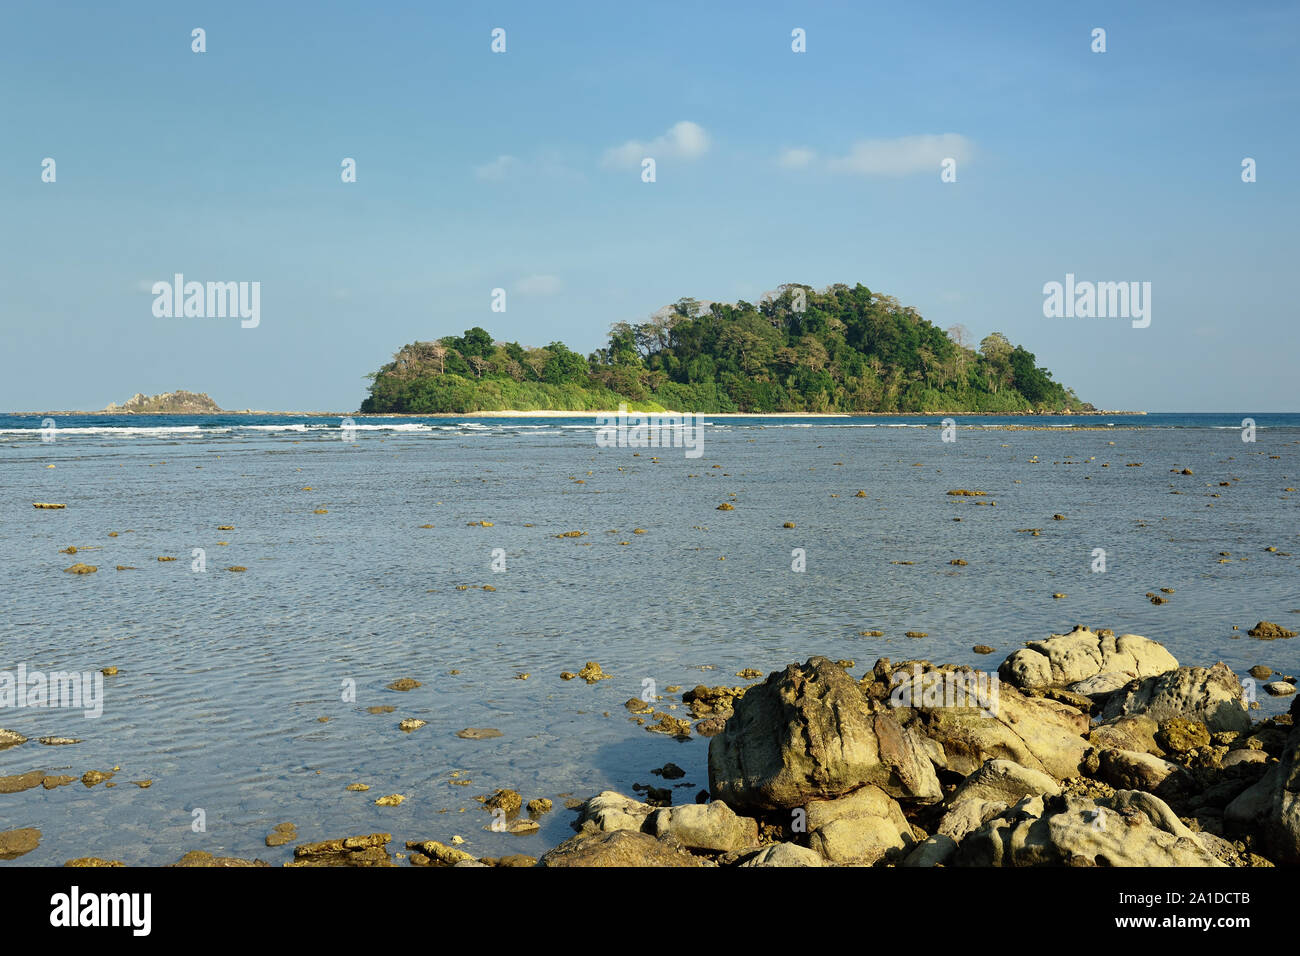 View on the Kalipur Beach of the Andaman and Nicobar Islands, India Stock Photo